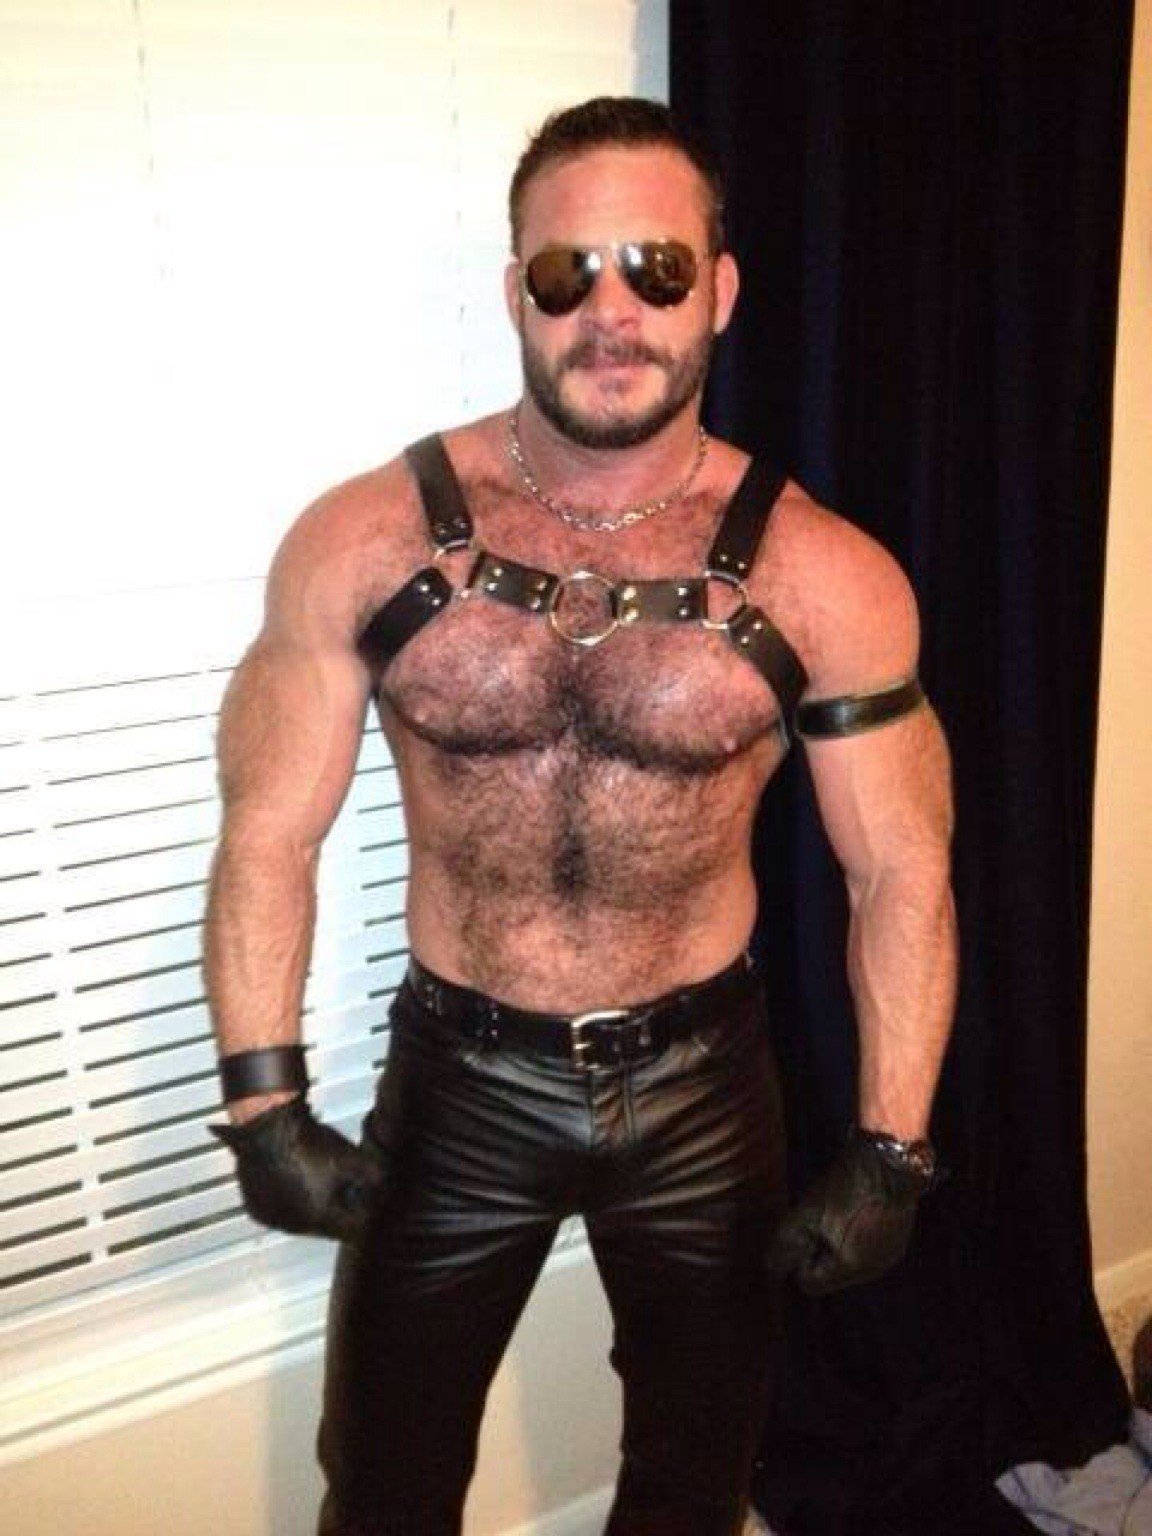 Photo by Smitty with the username @Resol702,  January 8, 2020 at 11:17 PM. The post is about the topic Leather Gays